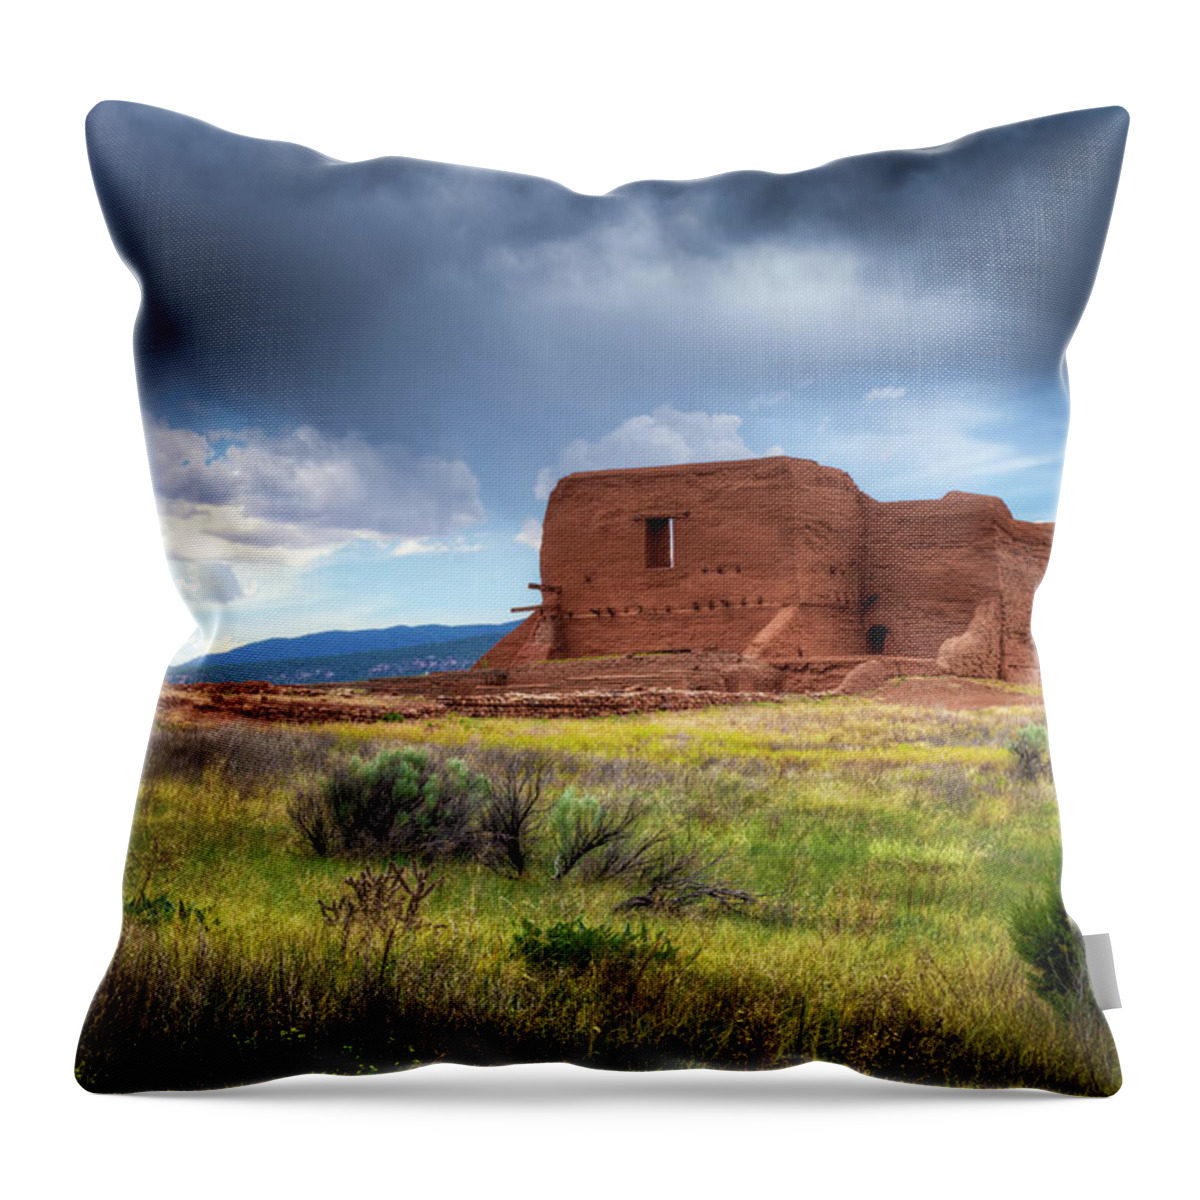 Pecos Throw Pillow featuring the photograph Pecos National Historical Park by James Barber